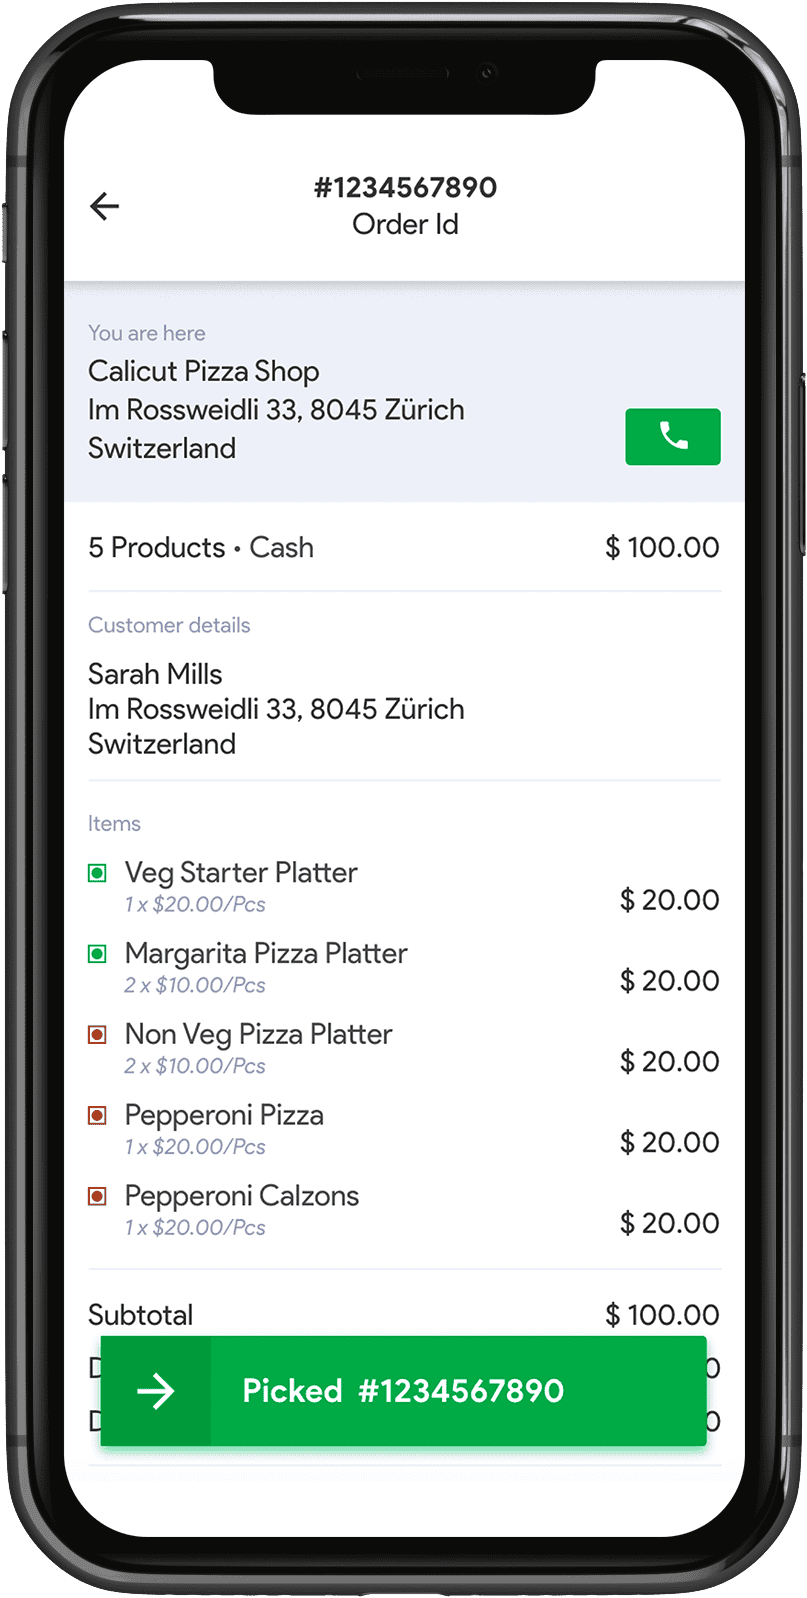 check-food-item-details-before-confirming-the-pickup-option-in-food-delivery-driver-app.png